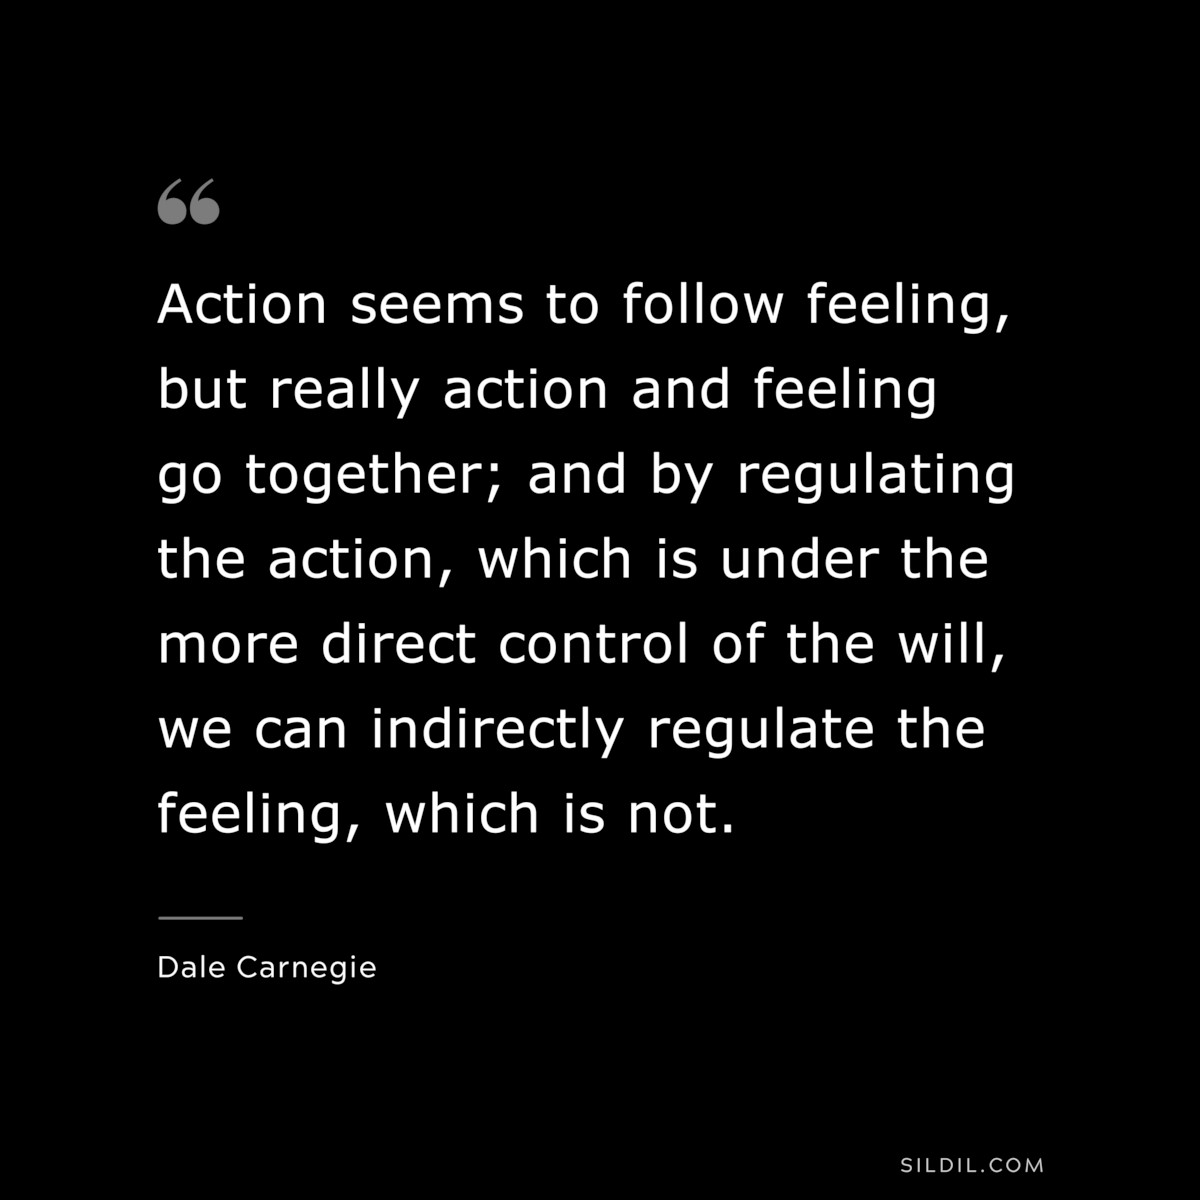 Action seems to follow feeling, but really action and feeling go together; and by regulating the action, which is under the more direct control of the will, we can indirectly regulate the feeling, which is not.― Dale Carnegie